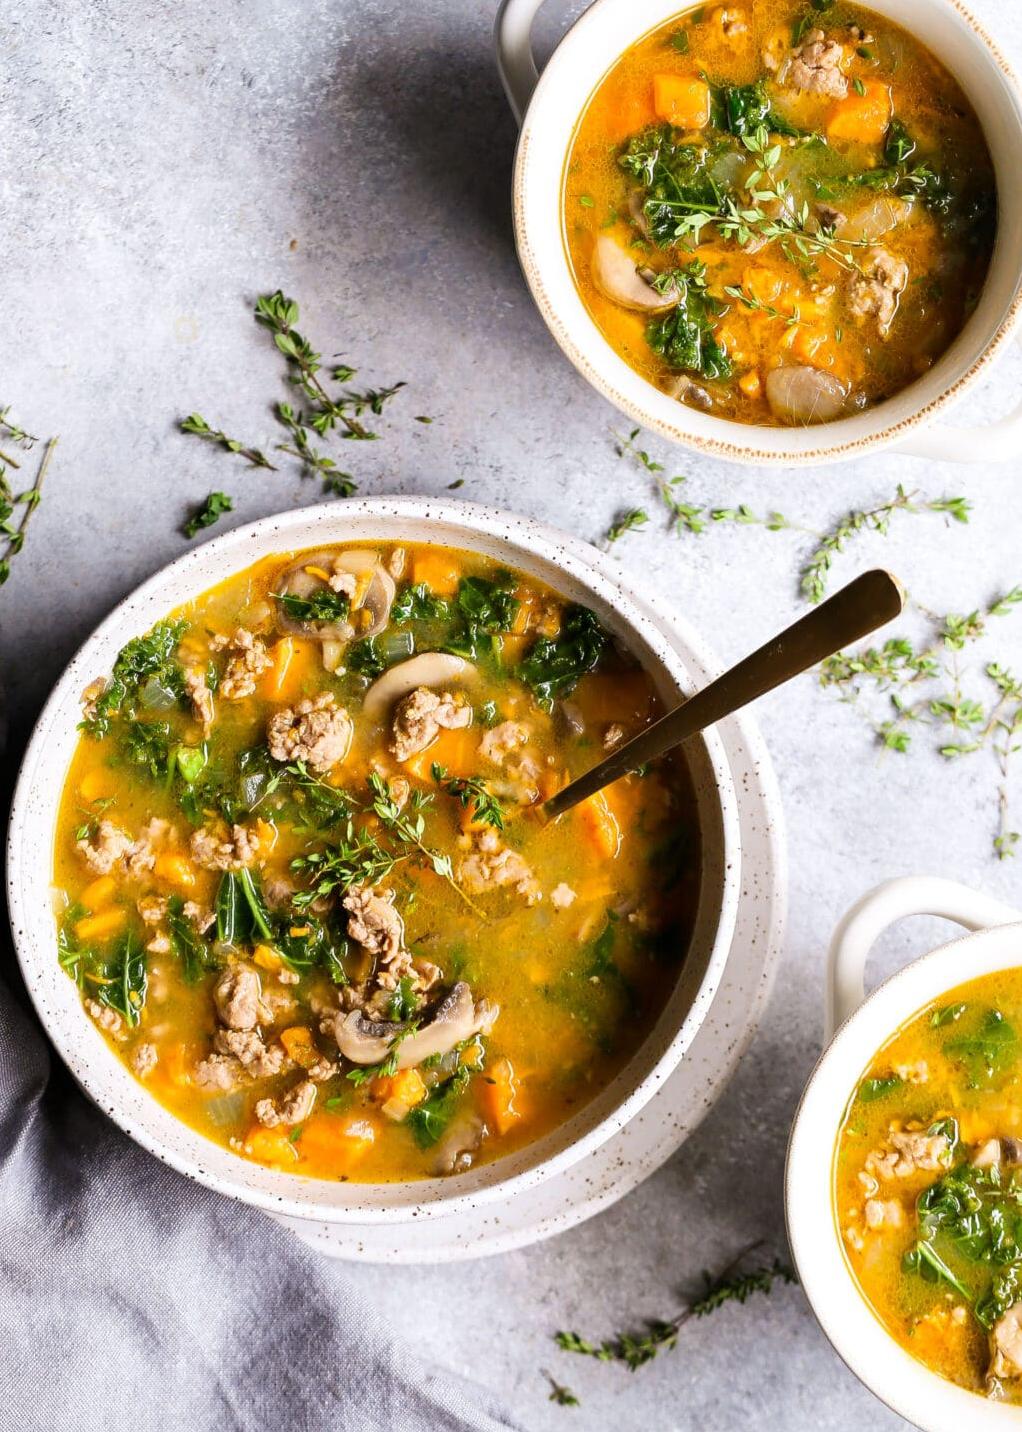  Take care of your body while still indulging in a flavorful soup.